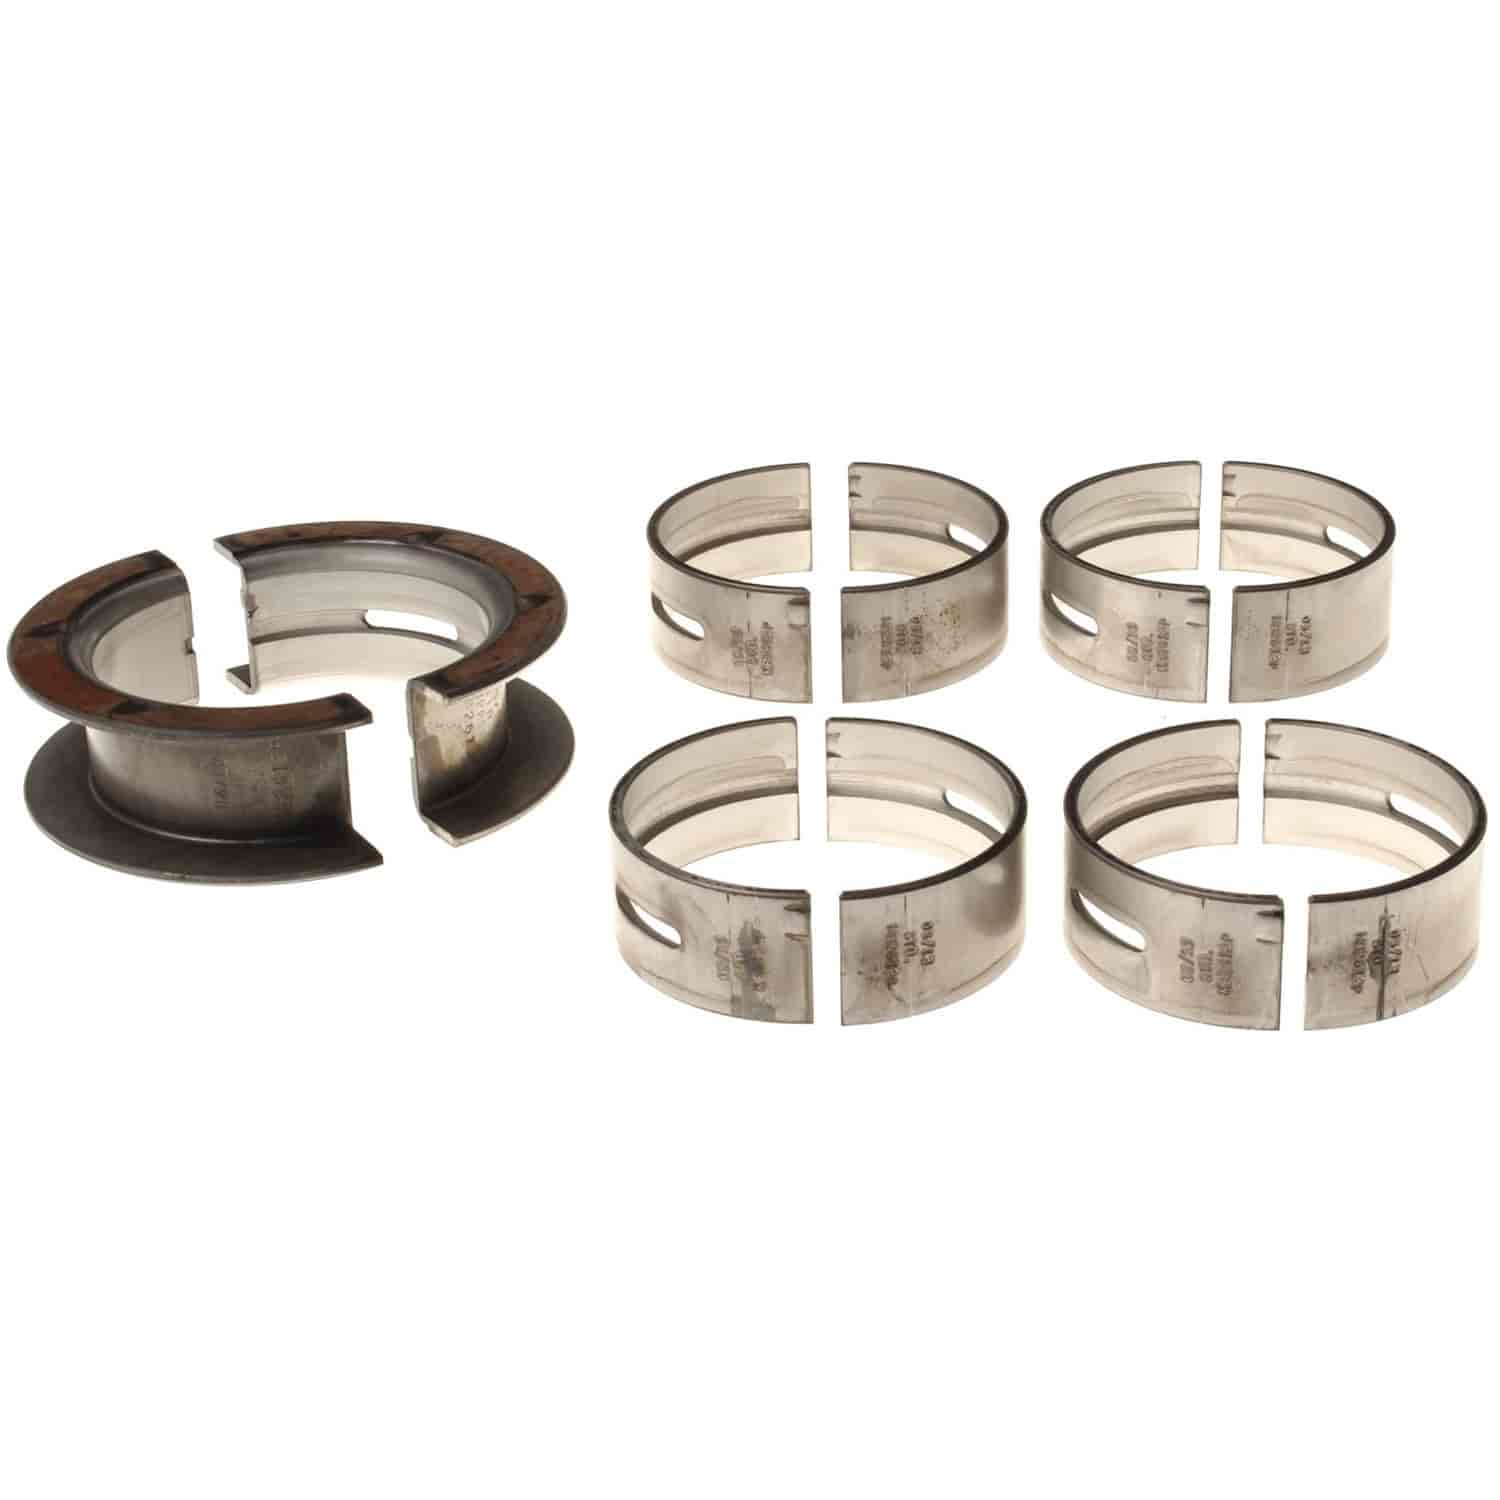 Main Bearing Set Ford 1974-1997 L4 2.0/2.3L with -.026mm Undersize